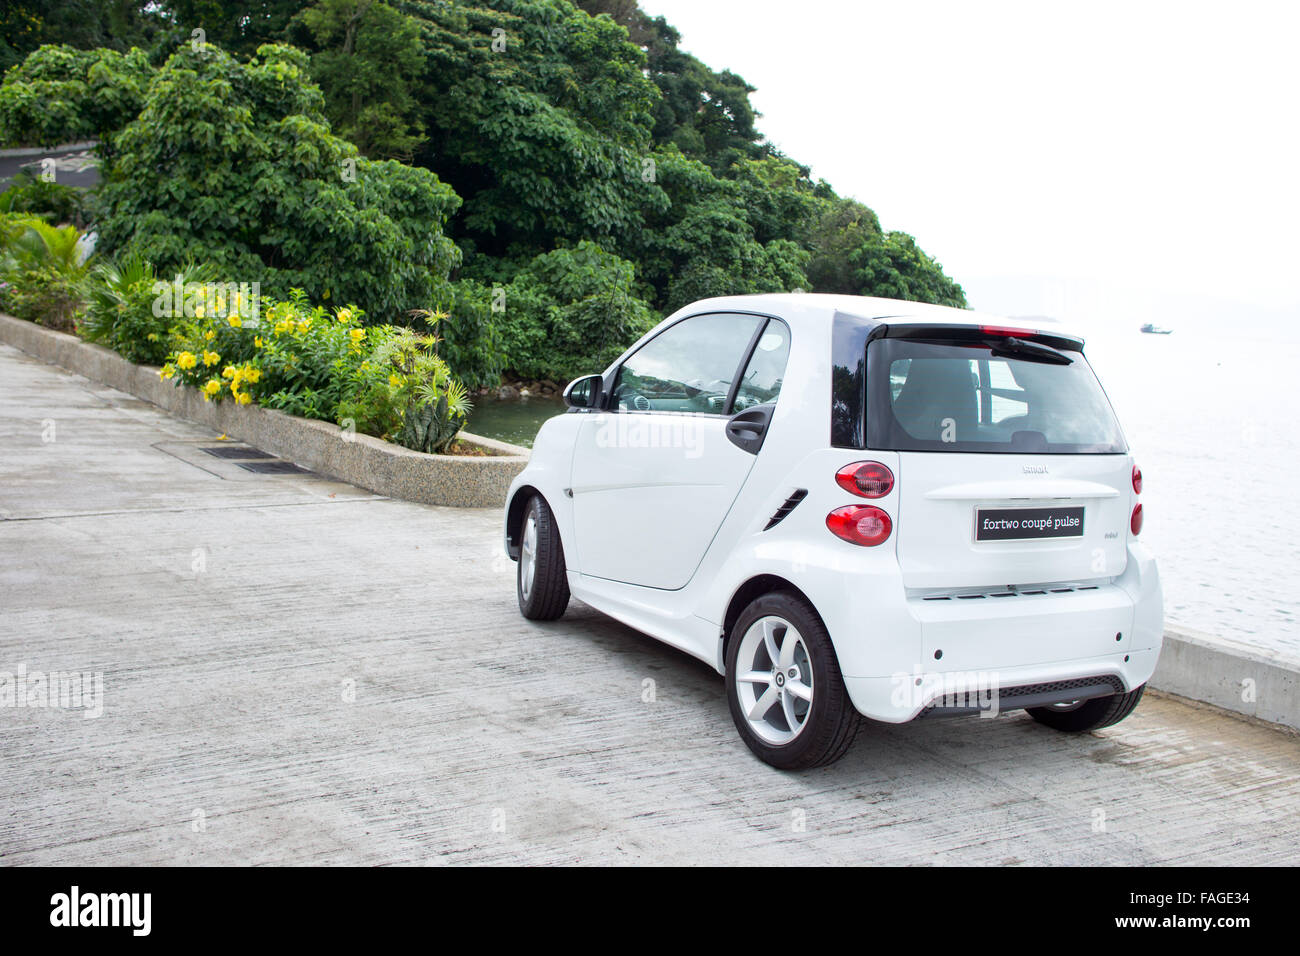 Hong Kong, China June 8, 2012 : Smart fortwo coupe pluse test drive on June  8 2012 in Hong Kong Stock Photo - Alamy